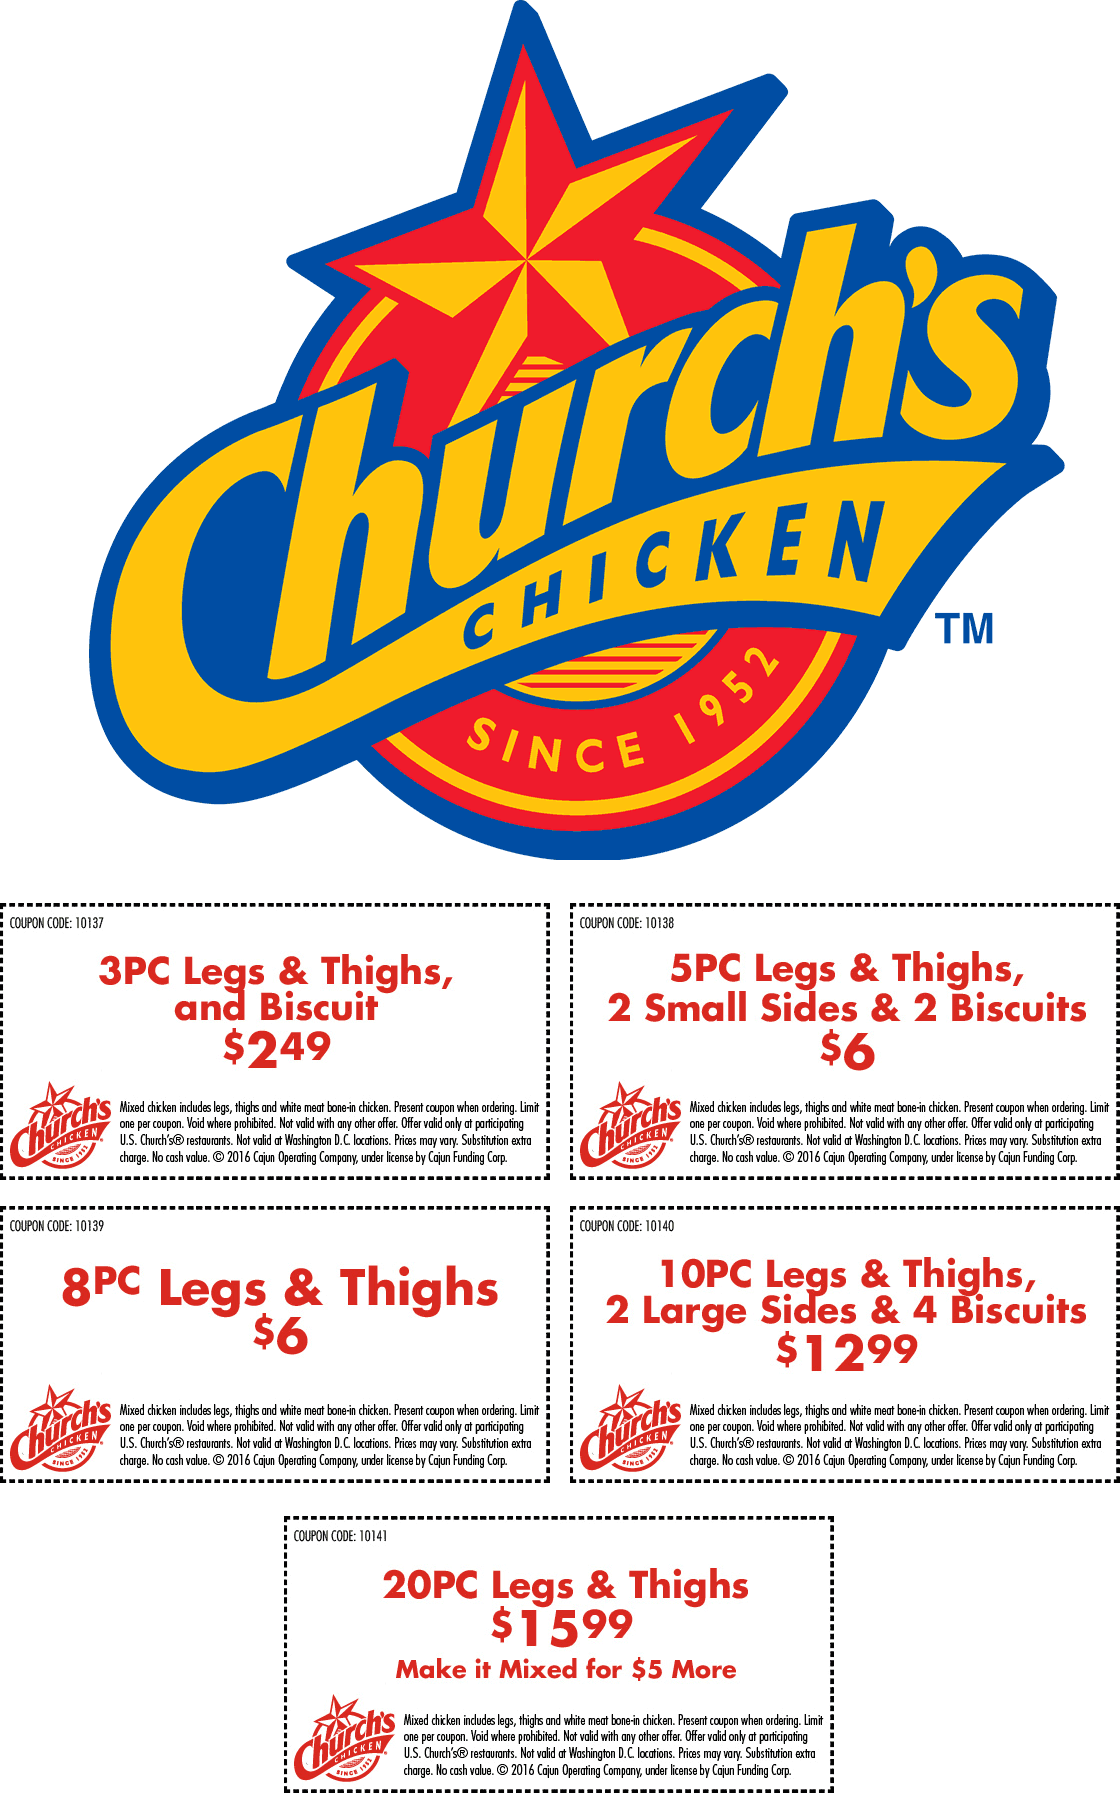 Churchs Chicken August 2021 Coupons and Promo Codes 🛒